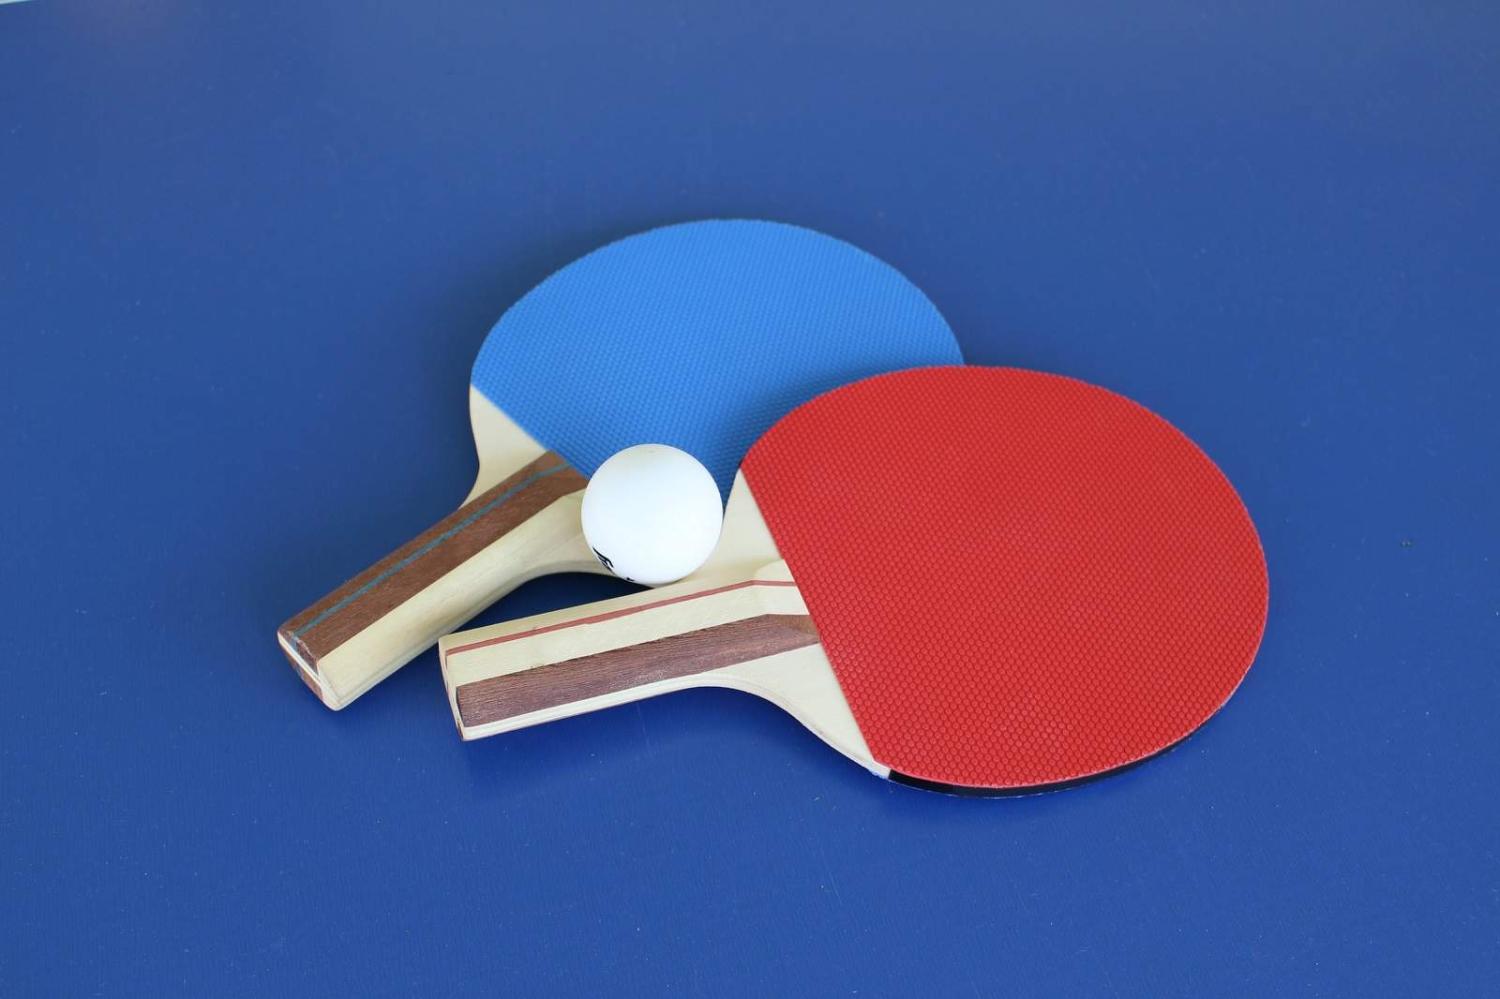 A conversation between American and Chinese table tennis players led to US President Richard Nixon visiting China in 1972 (Lisa Keffer/Unsplash)